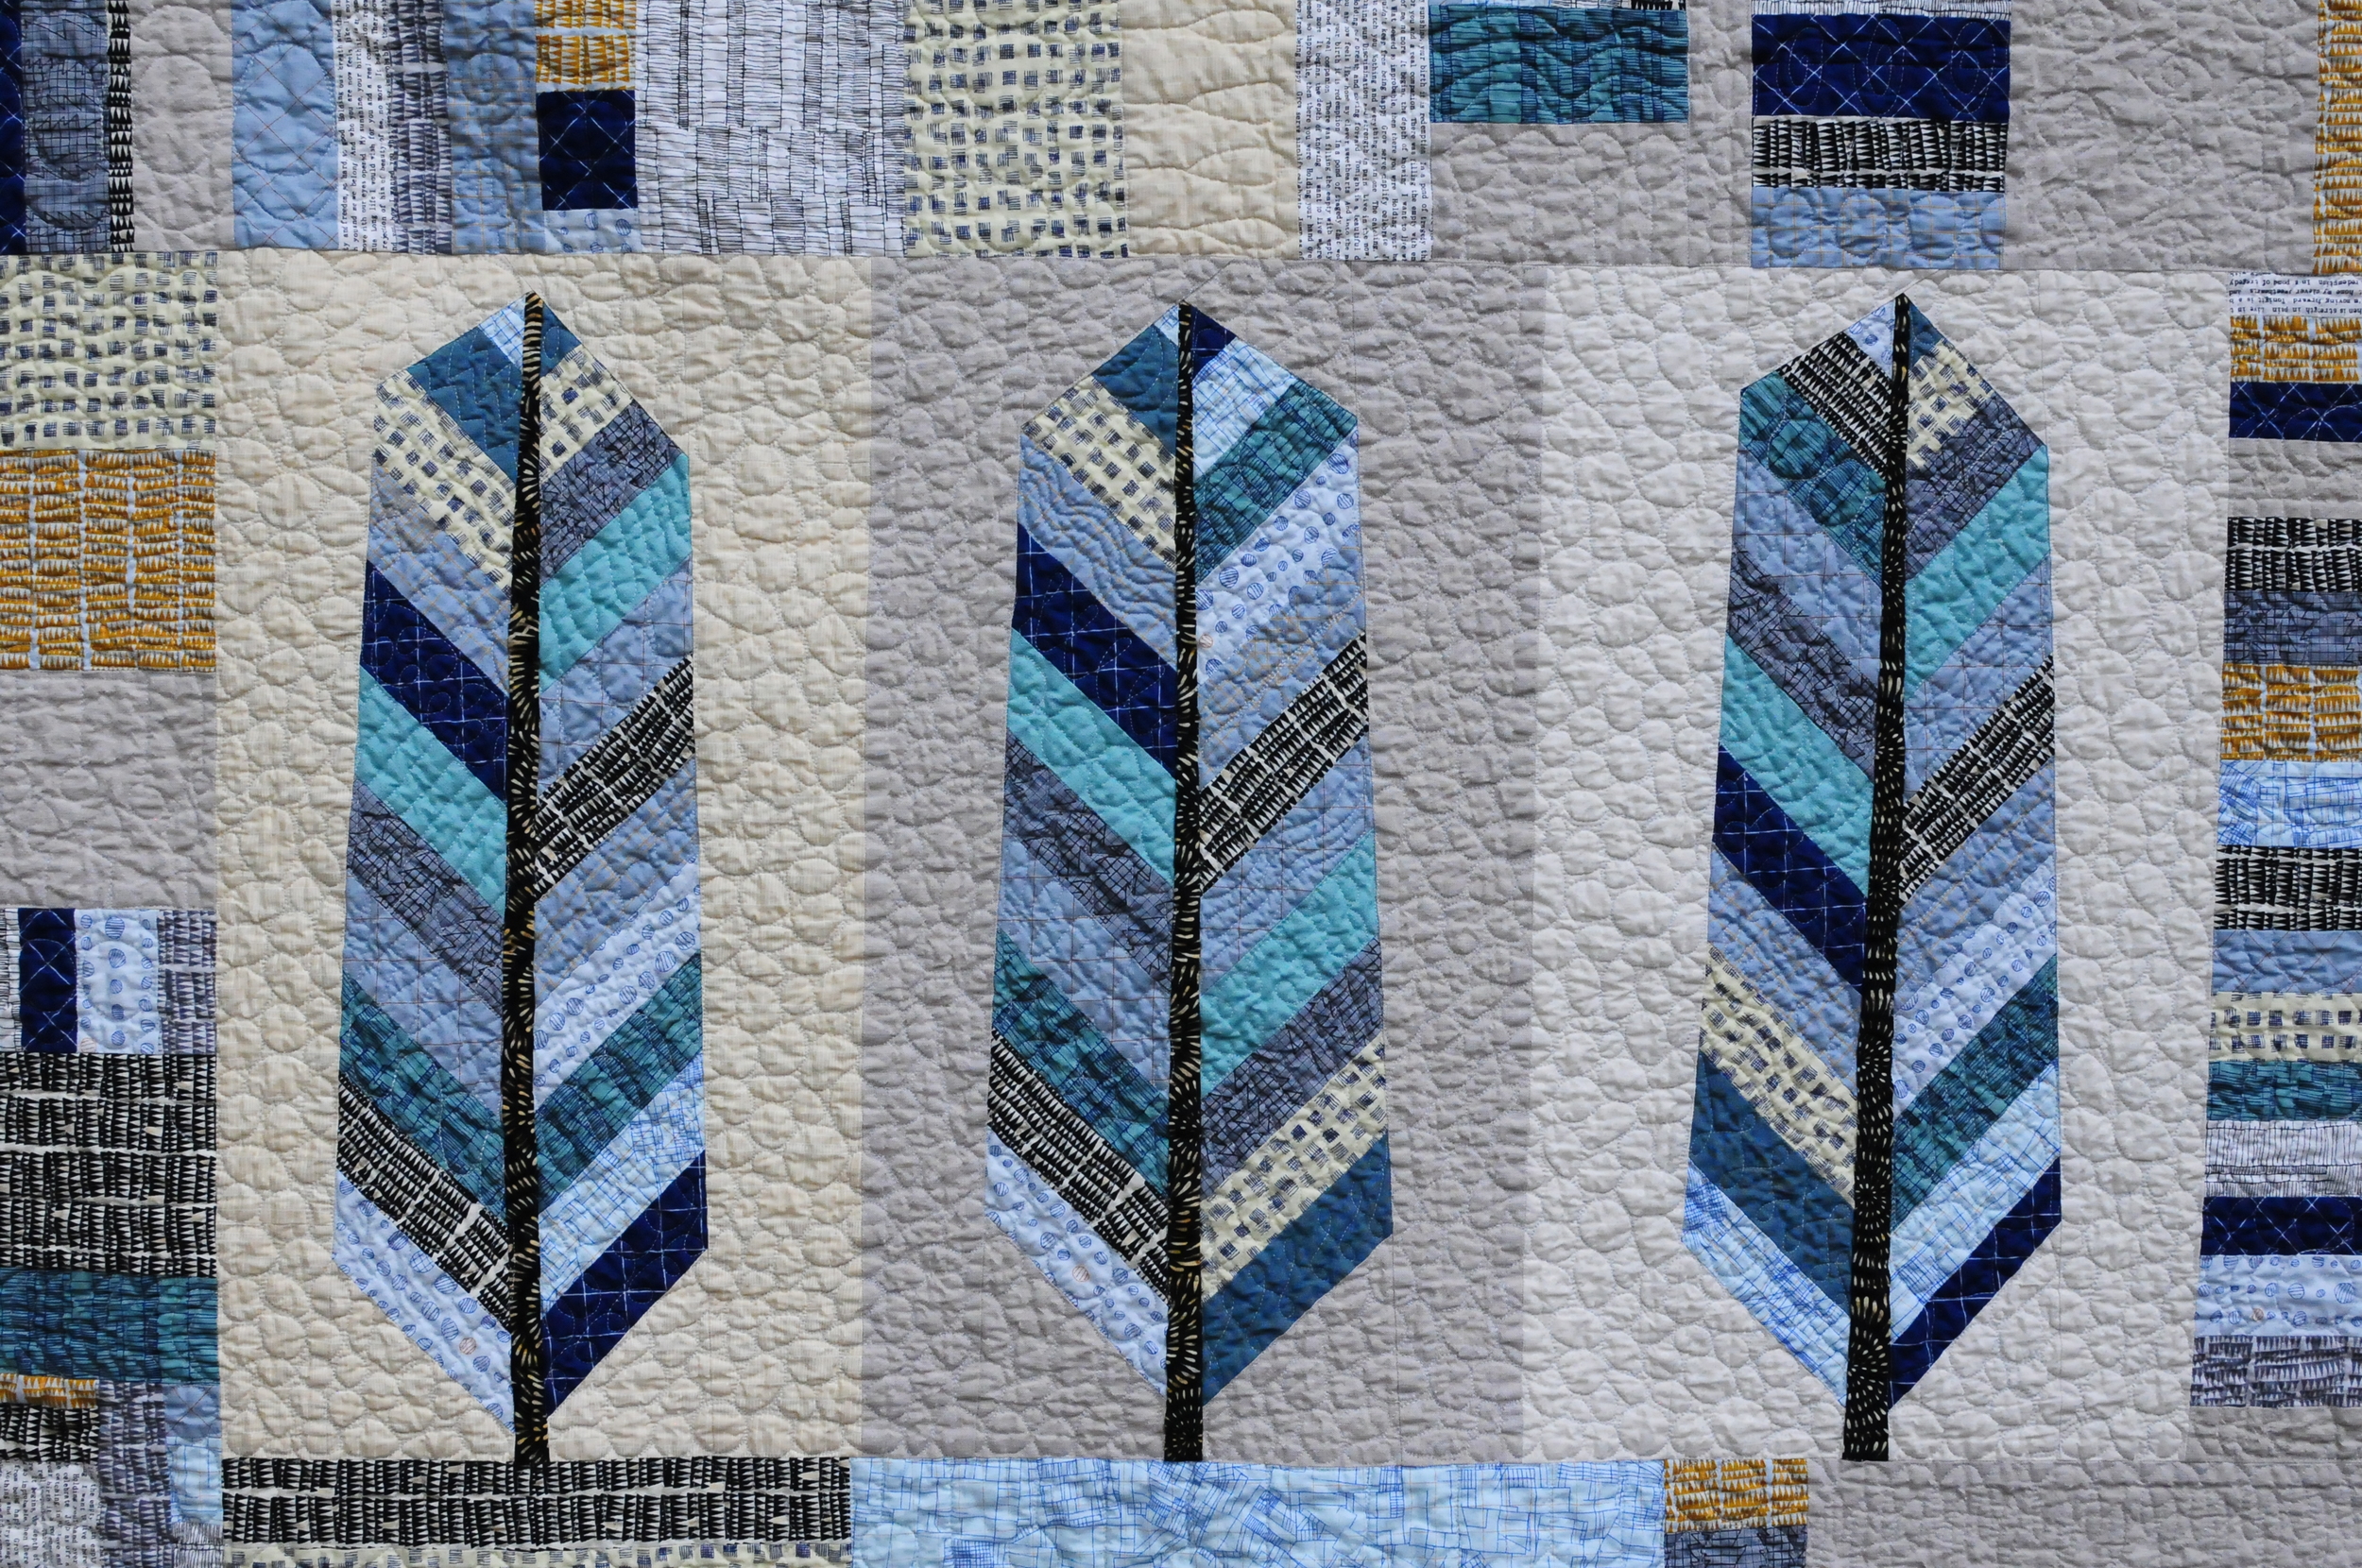 Quick & Easy Charity Quilts: Bonus: Optional Color Ways for Every Day Quilts